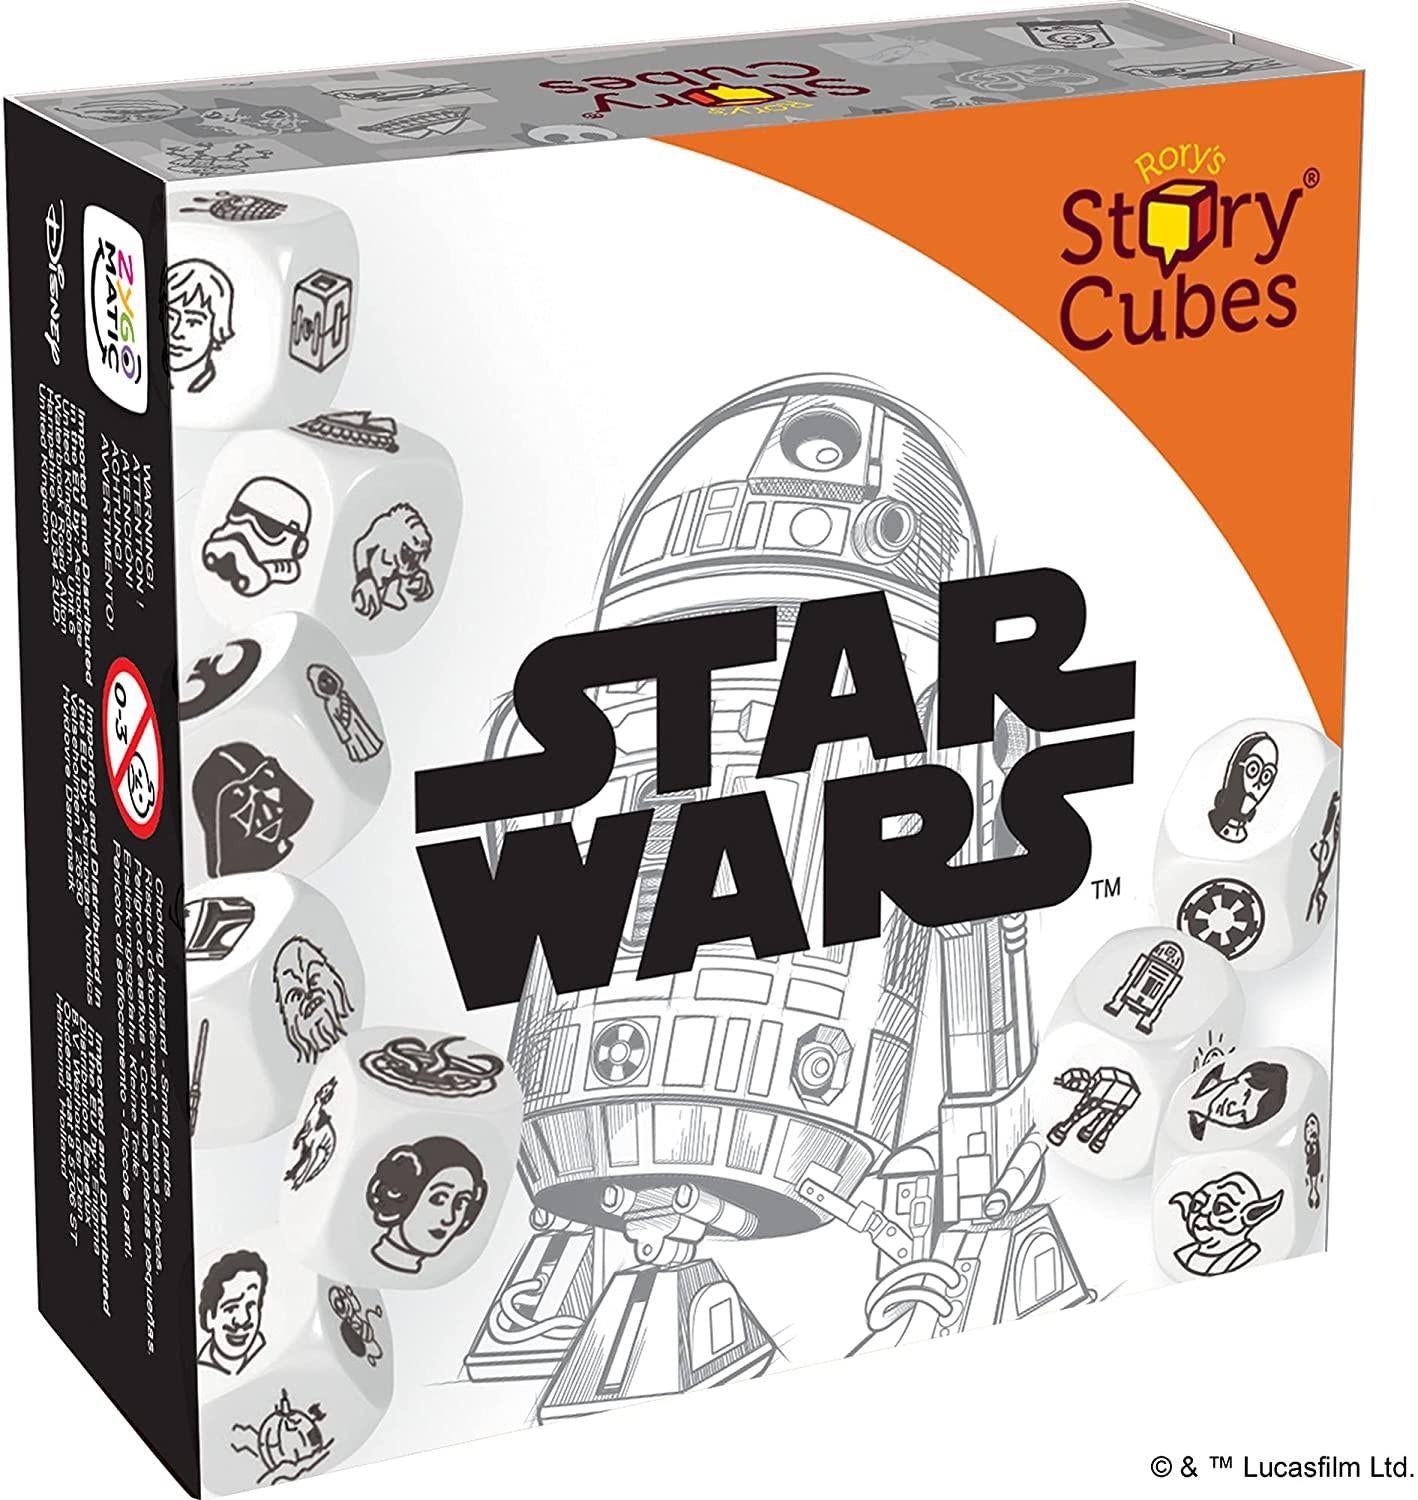 Rory's Star Wars Story Cubes ( Boxed ) Board Game by Zygomatic